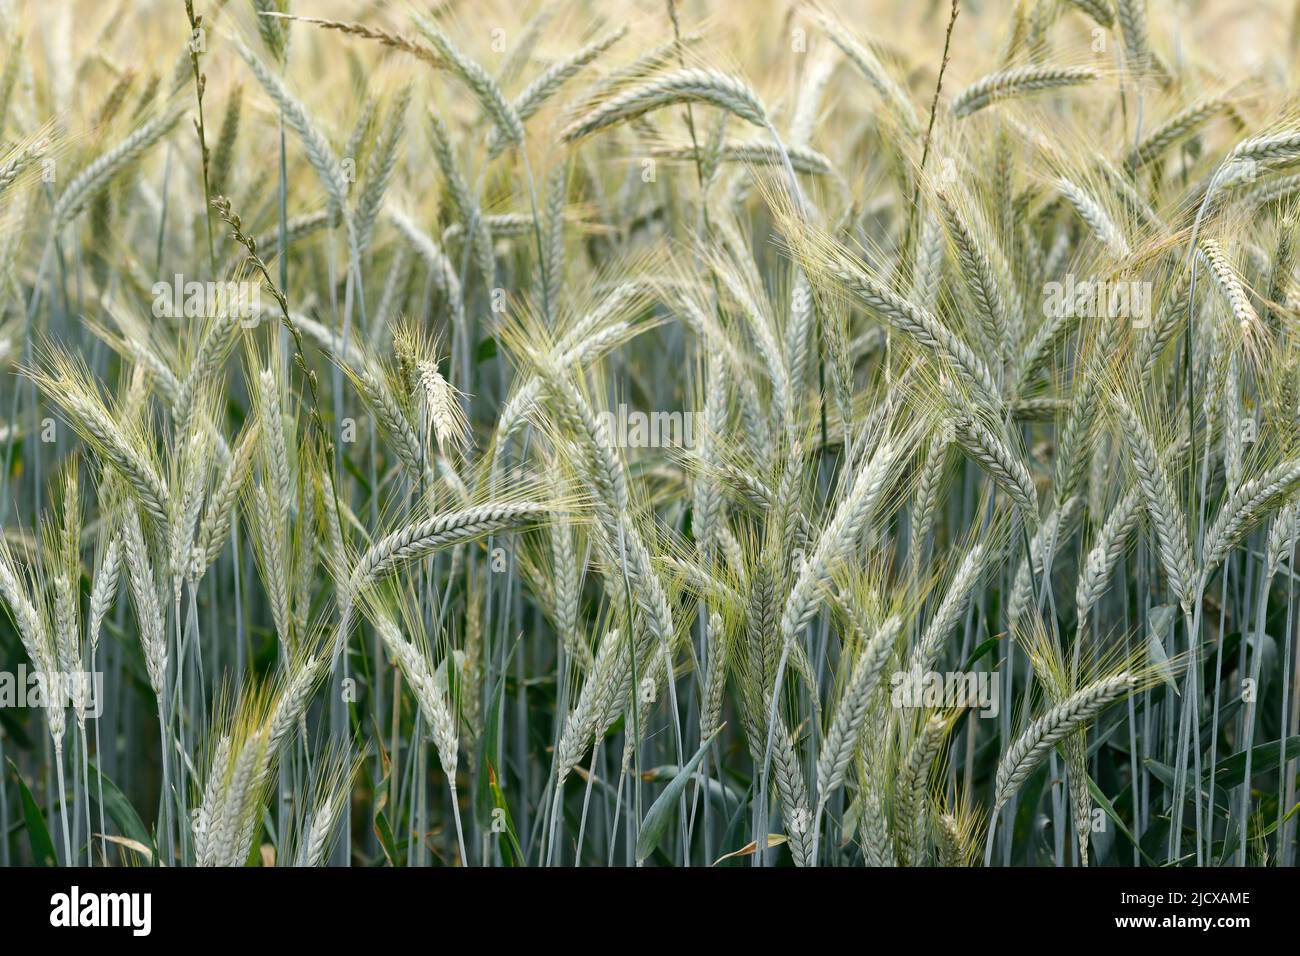 Wheat field, cultivated plants and agriculture, Yonne, France, Europe Stock Photo